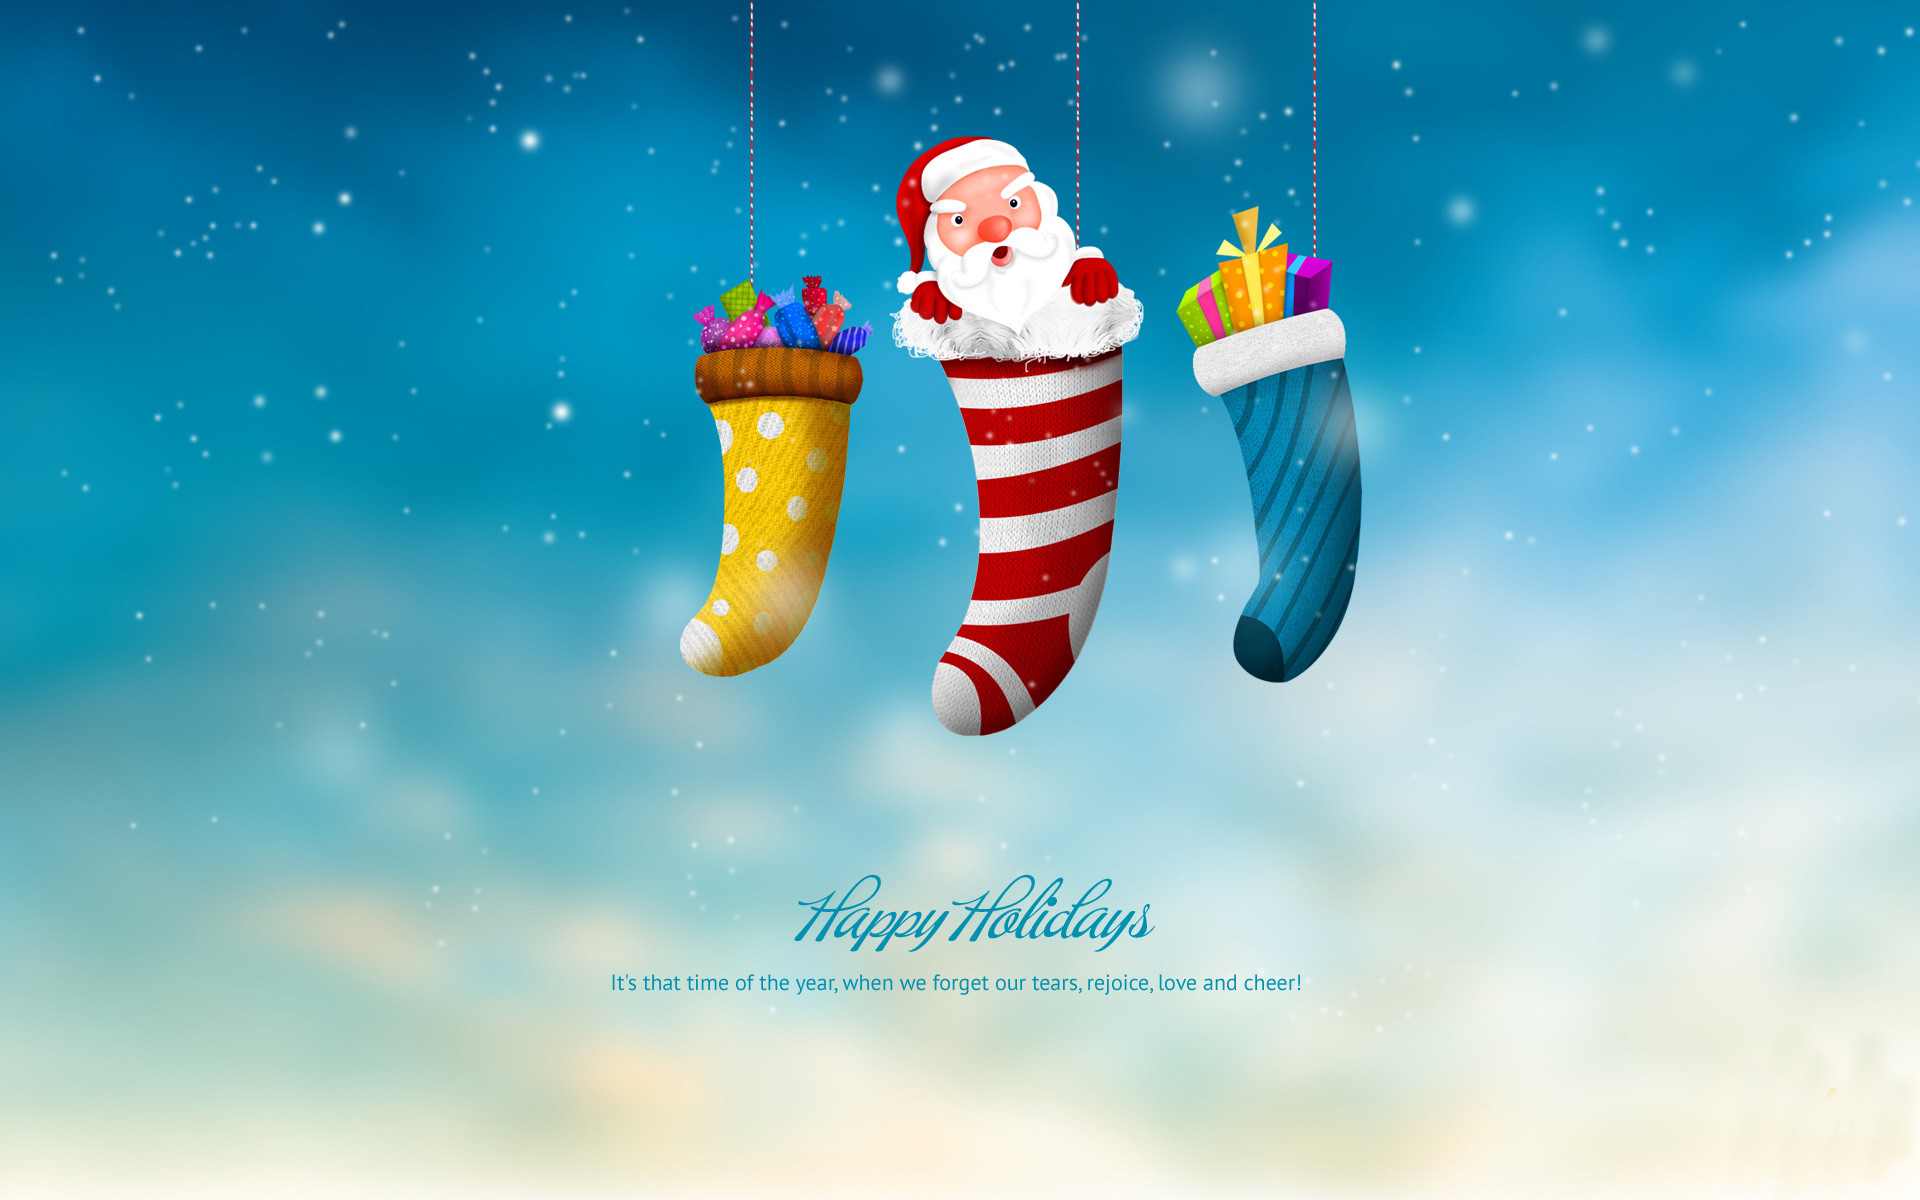 3D Holidays Christmas Wallpapers Find best latest 3D Holidays Christmas Wallpapers in HD for your